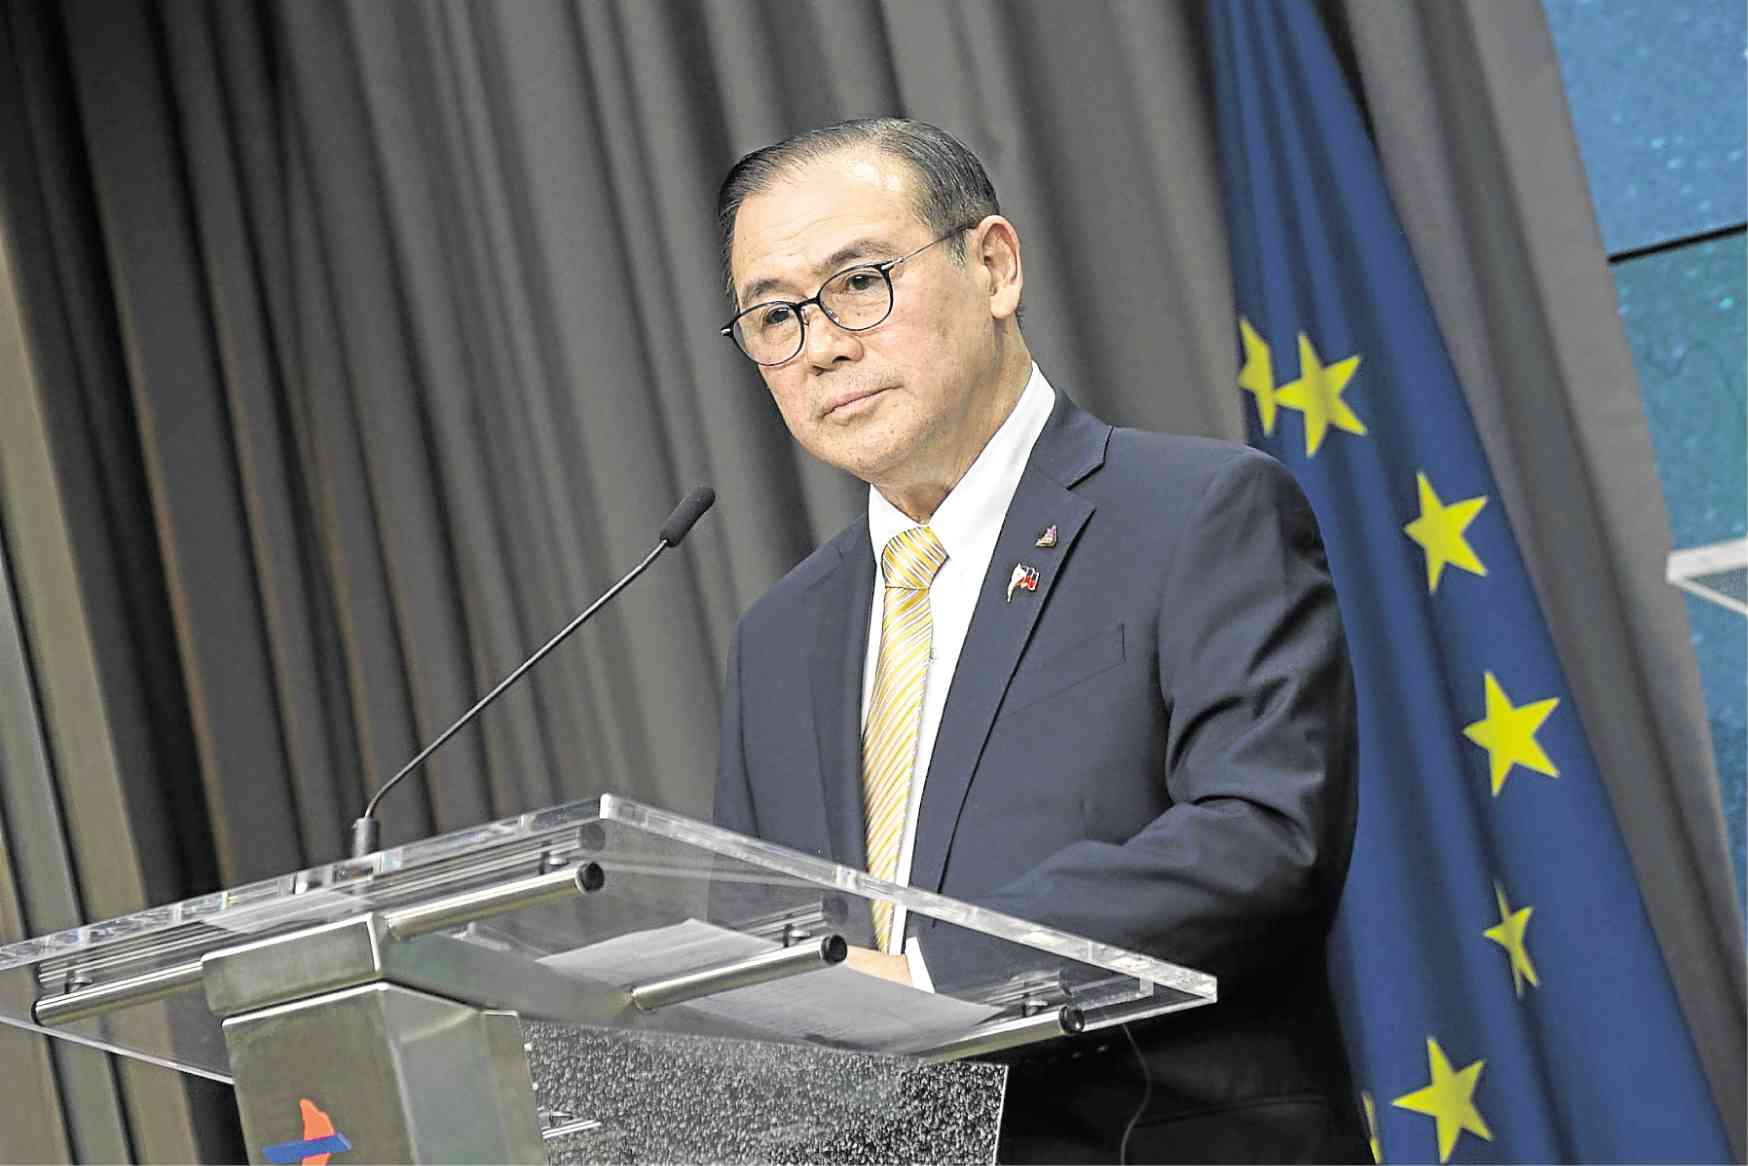 DFA's Locsin going to 'personally see' safety of Filipinos at Ukranian border